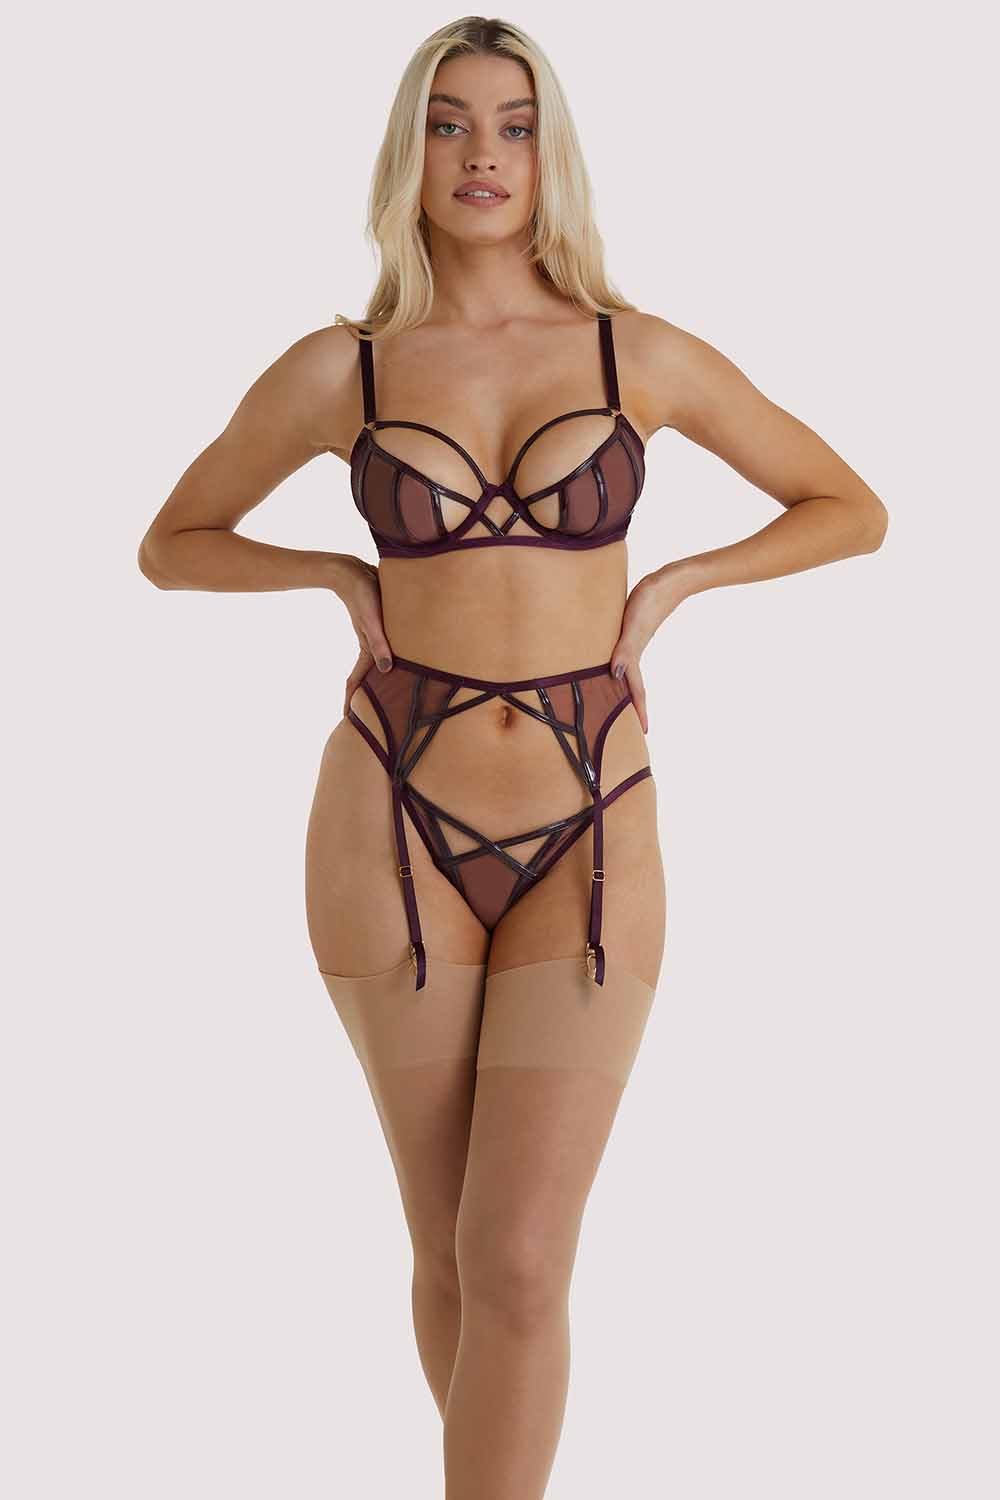 Kelly Wine PVC Cut Out Suspender